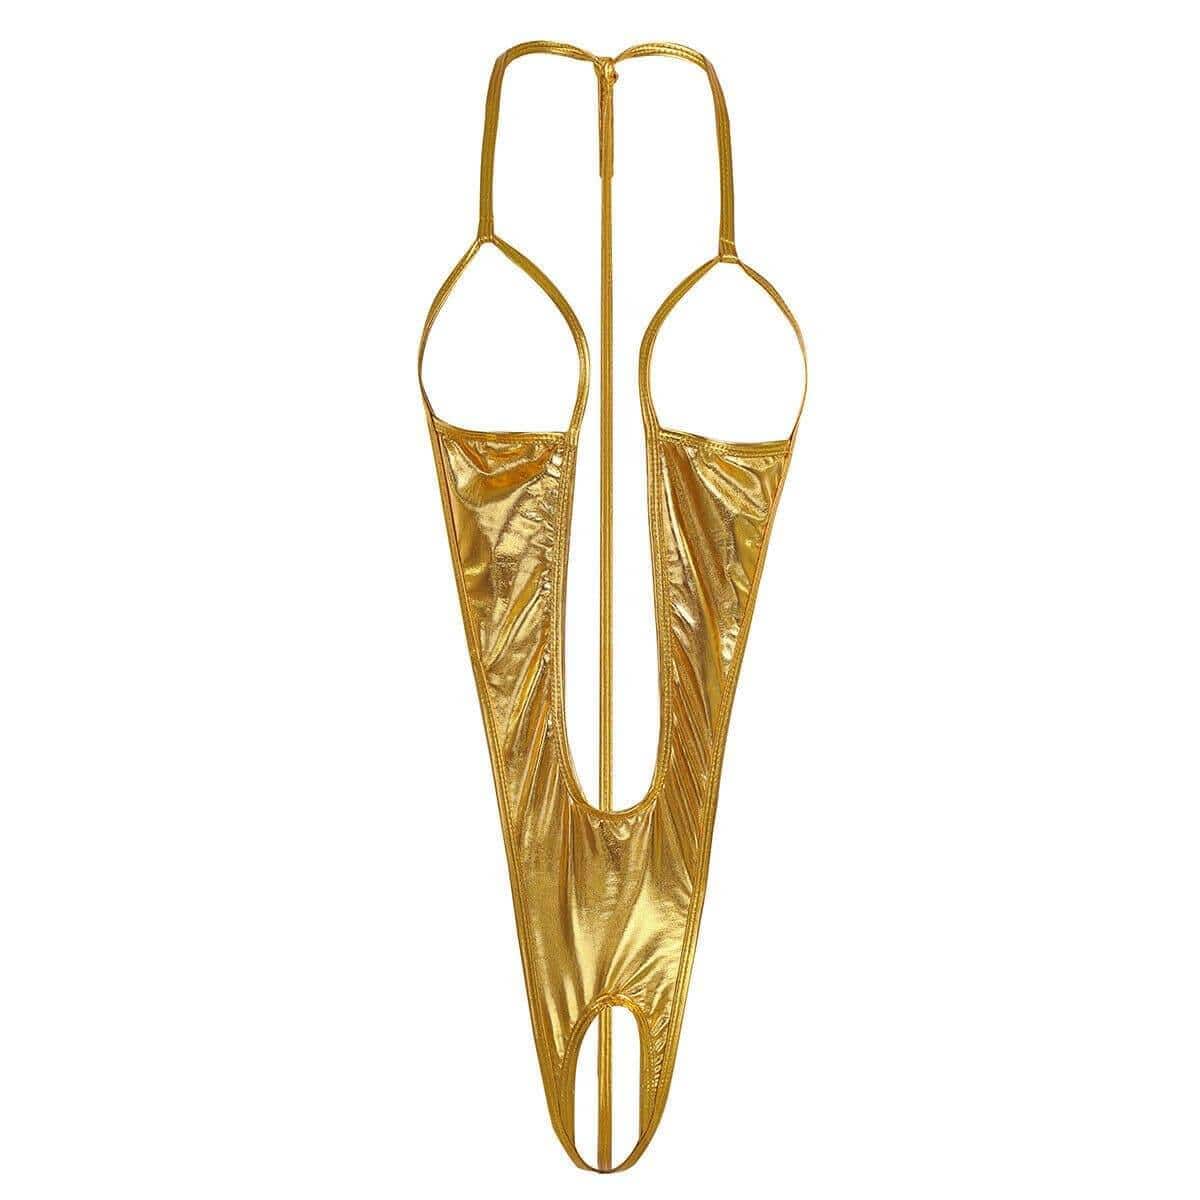 SoHot Swimwear Apparel & Accessories > Clothing > Swimwear Metallic Gold Extreme Open Bust & Crotch Thong G-String One Piece Swimsuit Metallic Gold Bikini Micro Open Bust Crotch Thong G-String Swimsuit